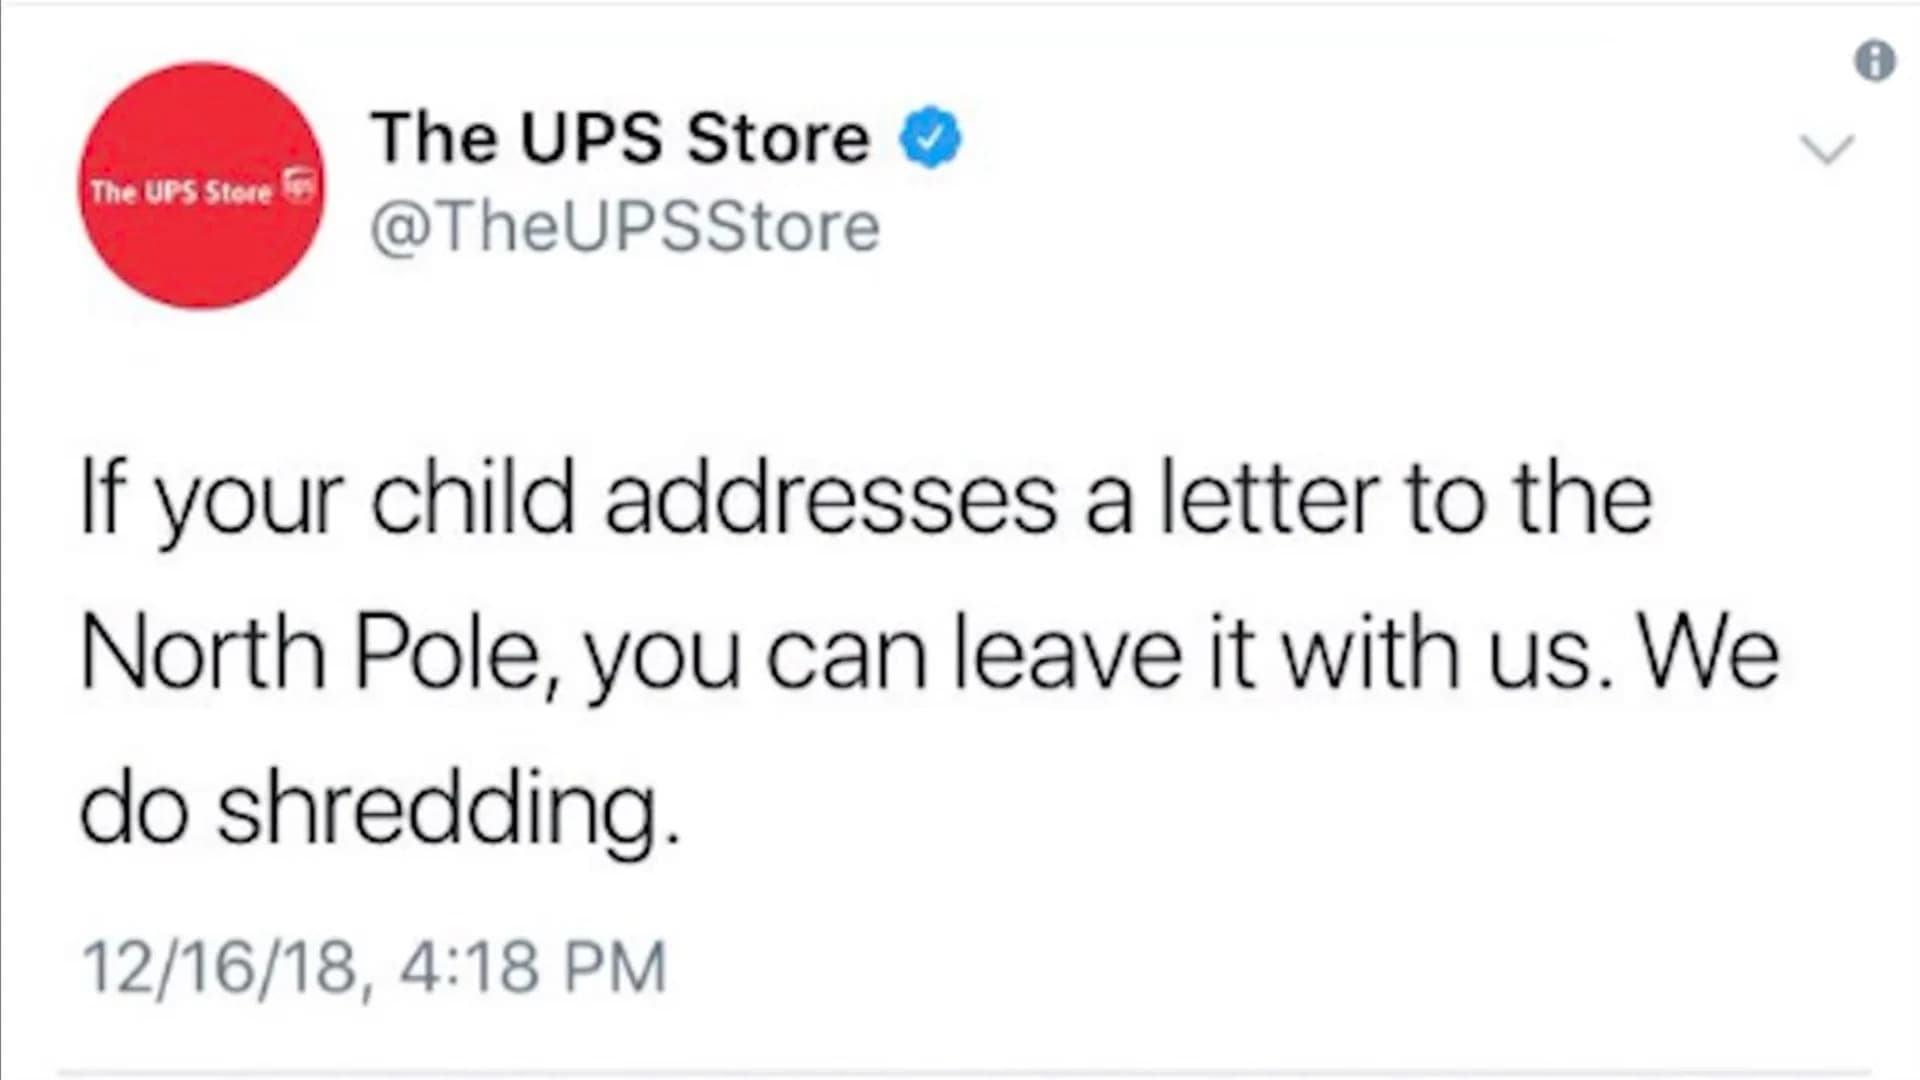 On the ‘Naughty List’ – UPS Store jokes about shredding Santa letters